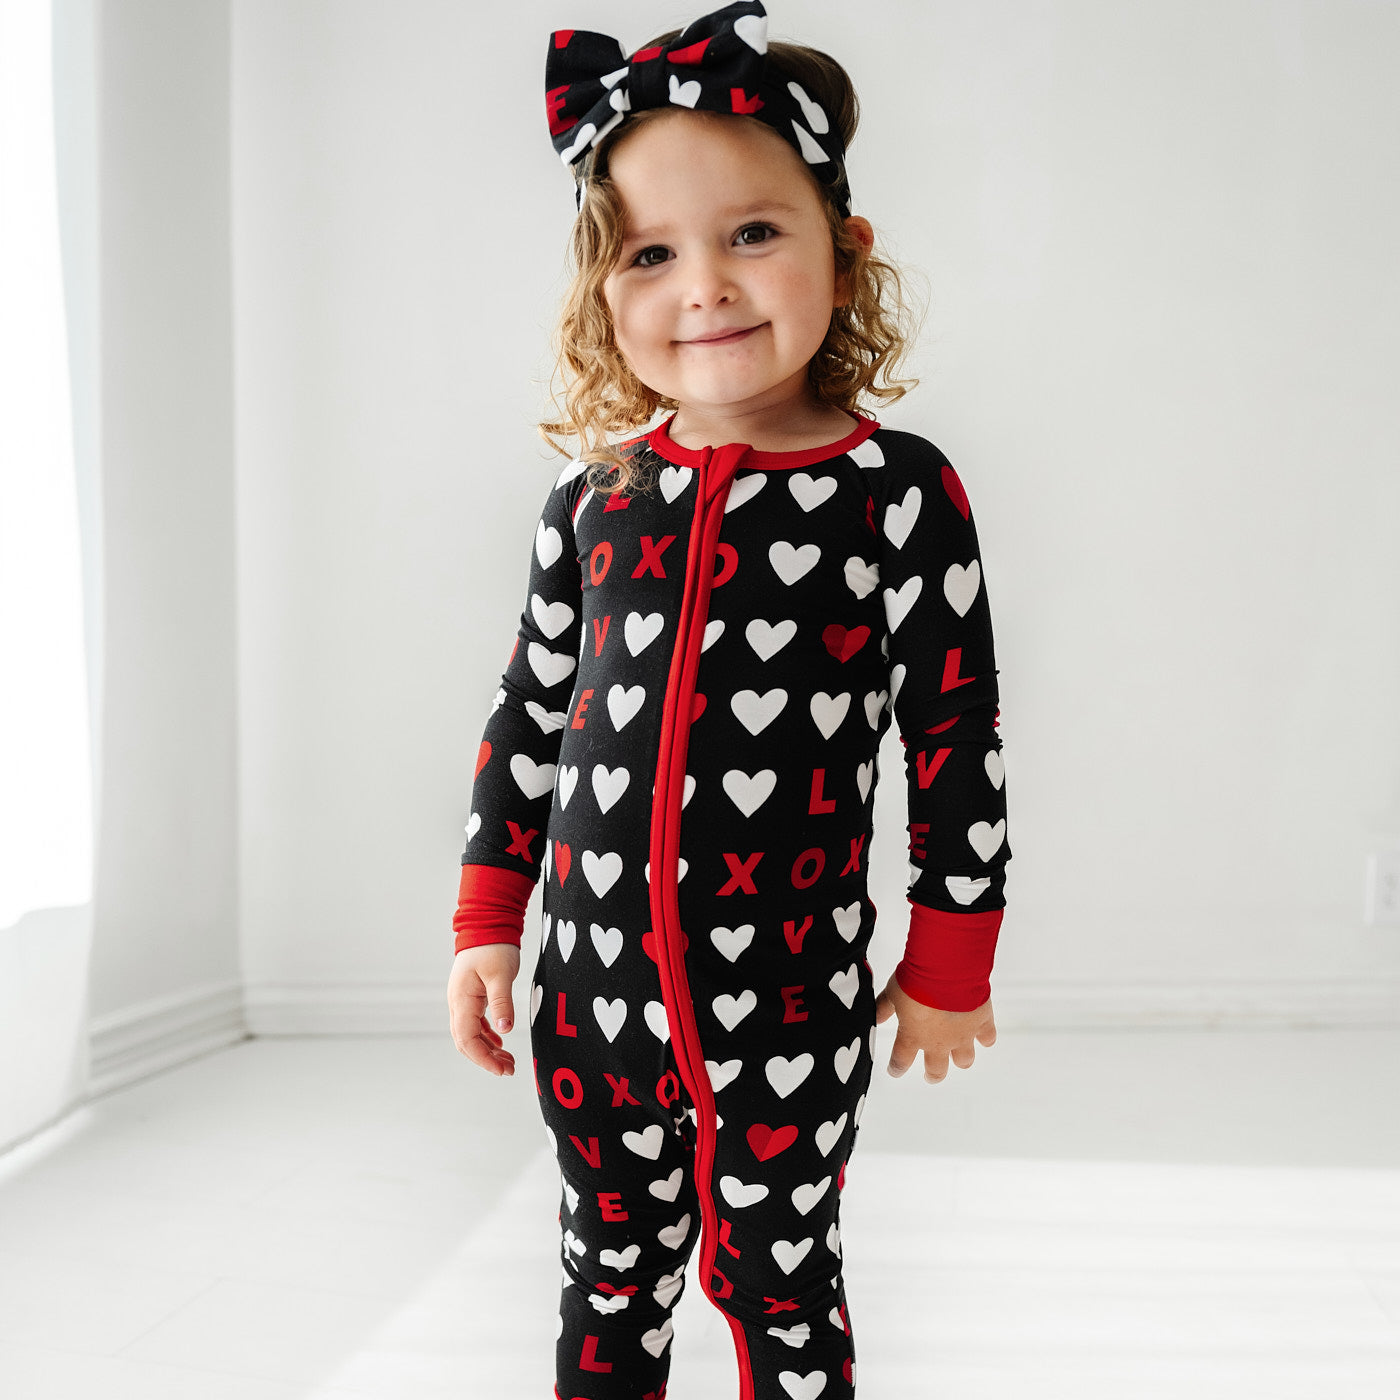 Image of a child posing wearing a Black XOXO zippy paired with a matching luxe bow headband